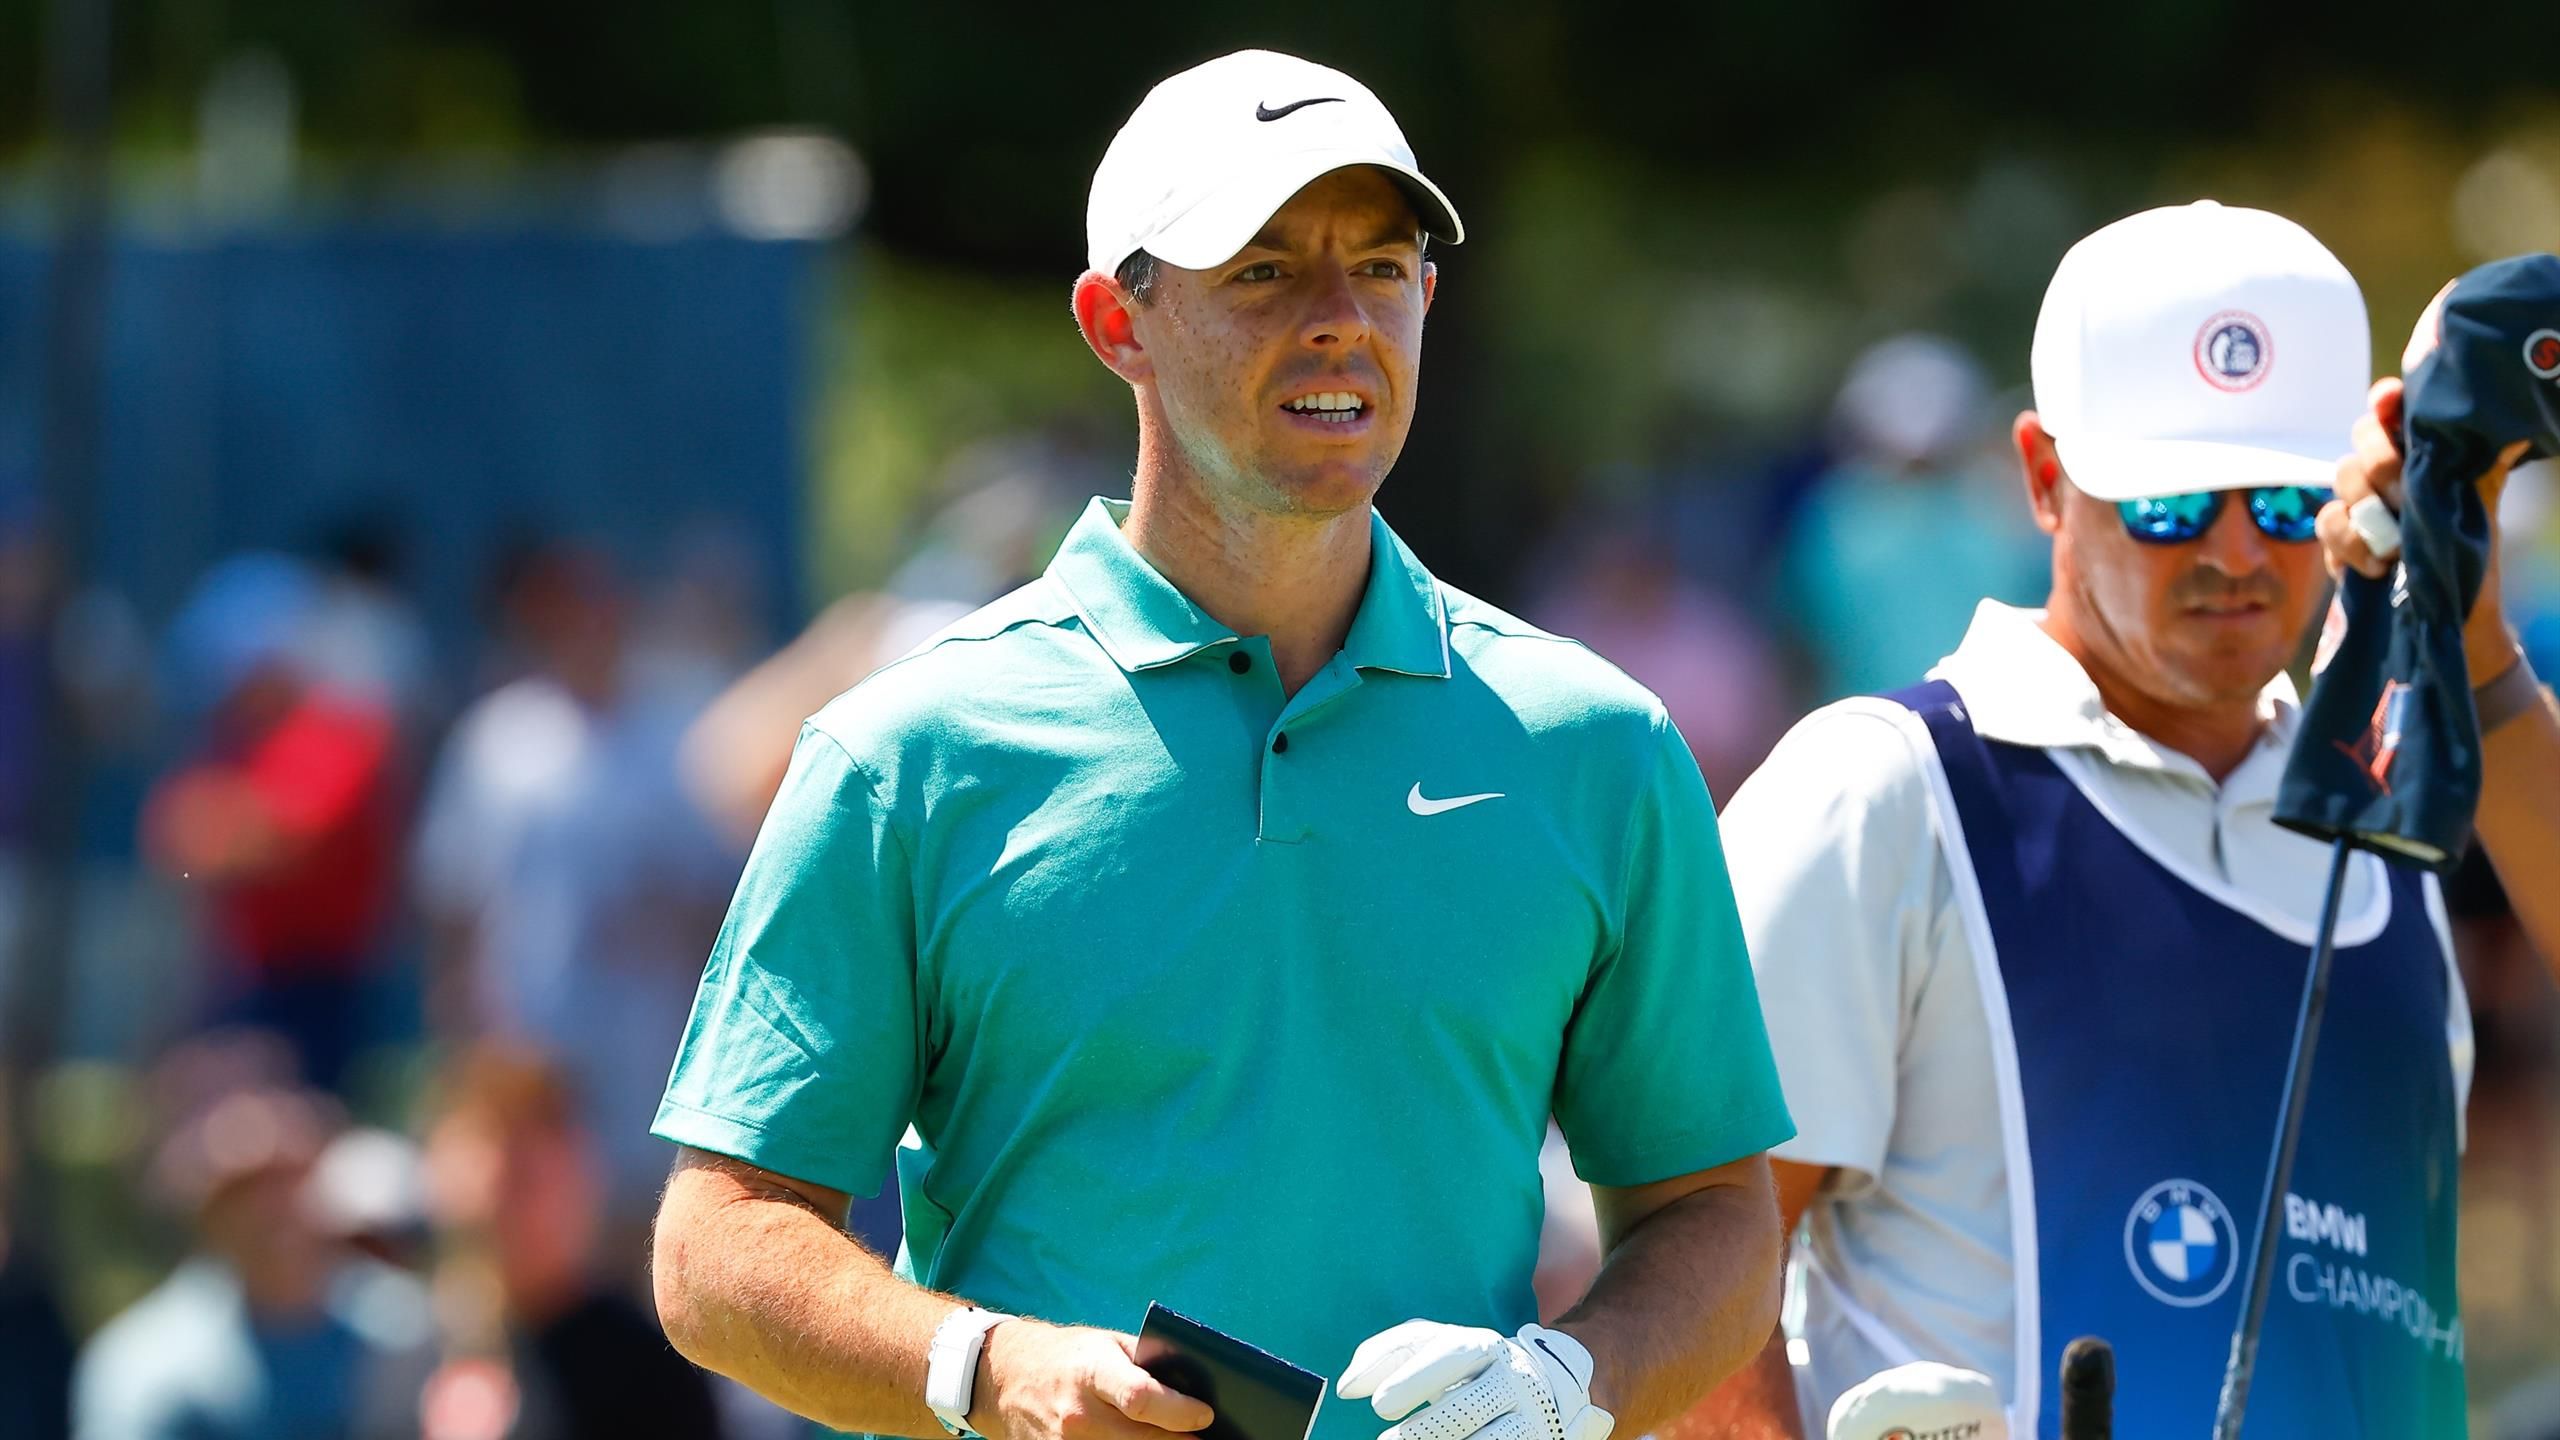 Tour Championship 2022 Tee times, prize money, TV coverage as Rory McIlroy and Scottie Scheffler head field